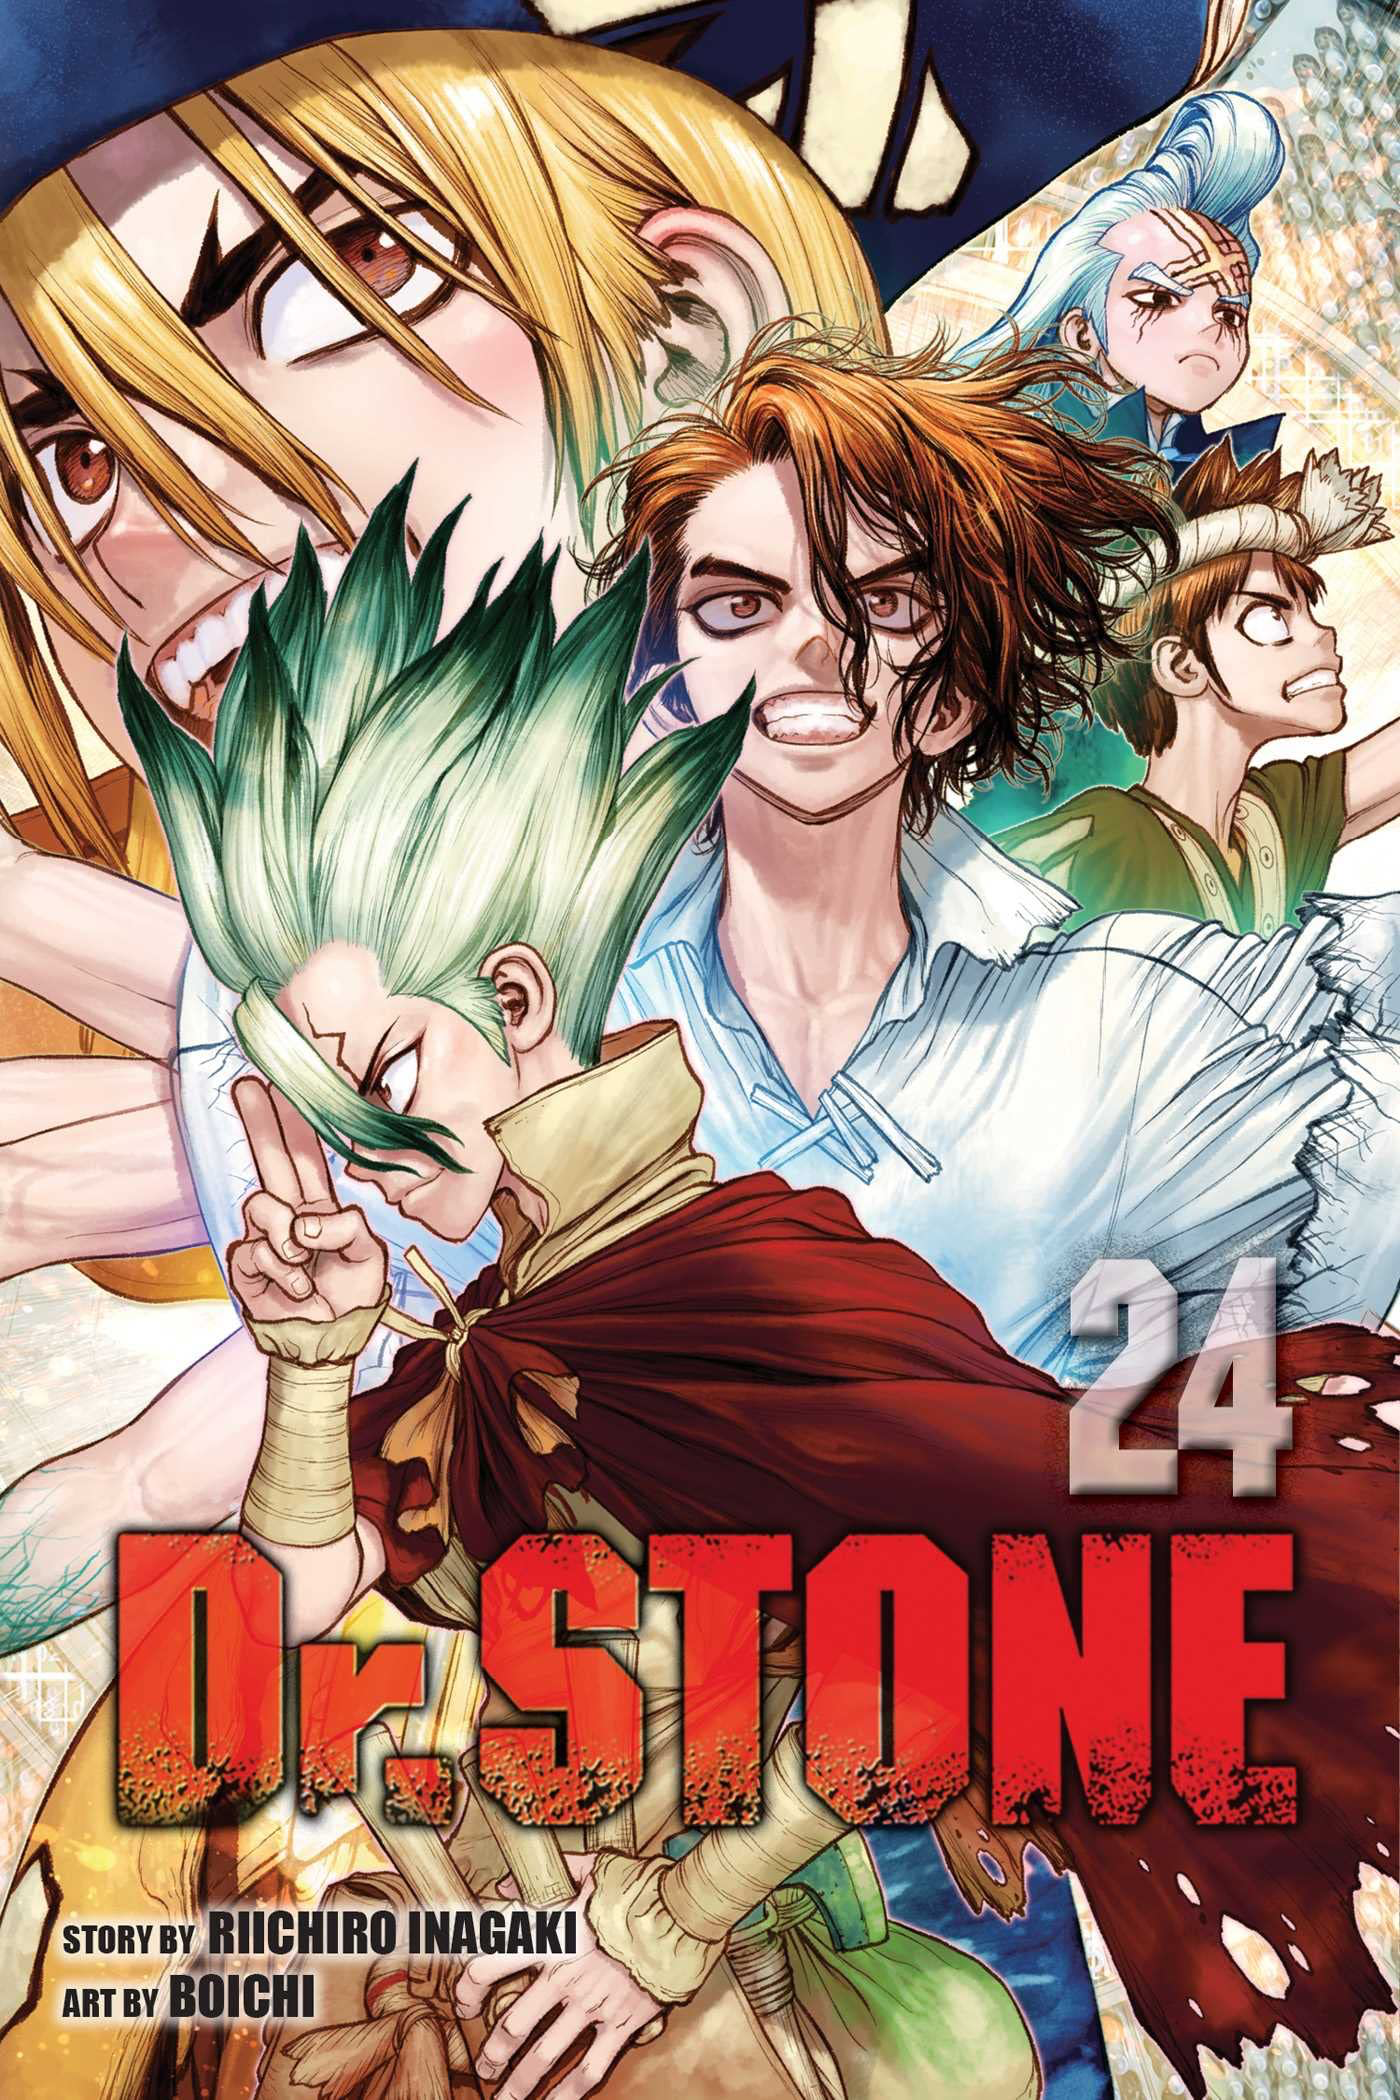 Dr. Stone Season 3 Episode 2 Link and Discussion : r/DrStone